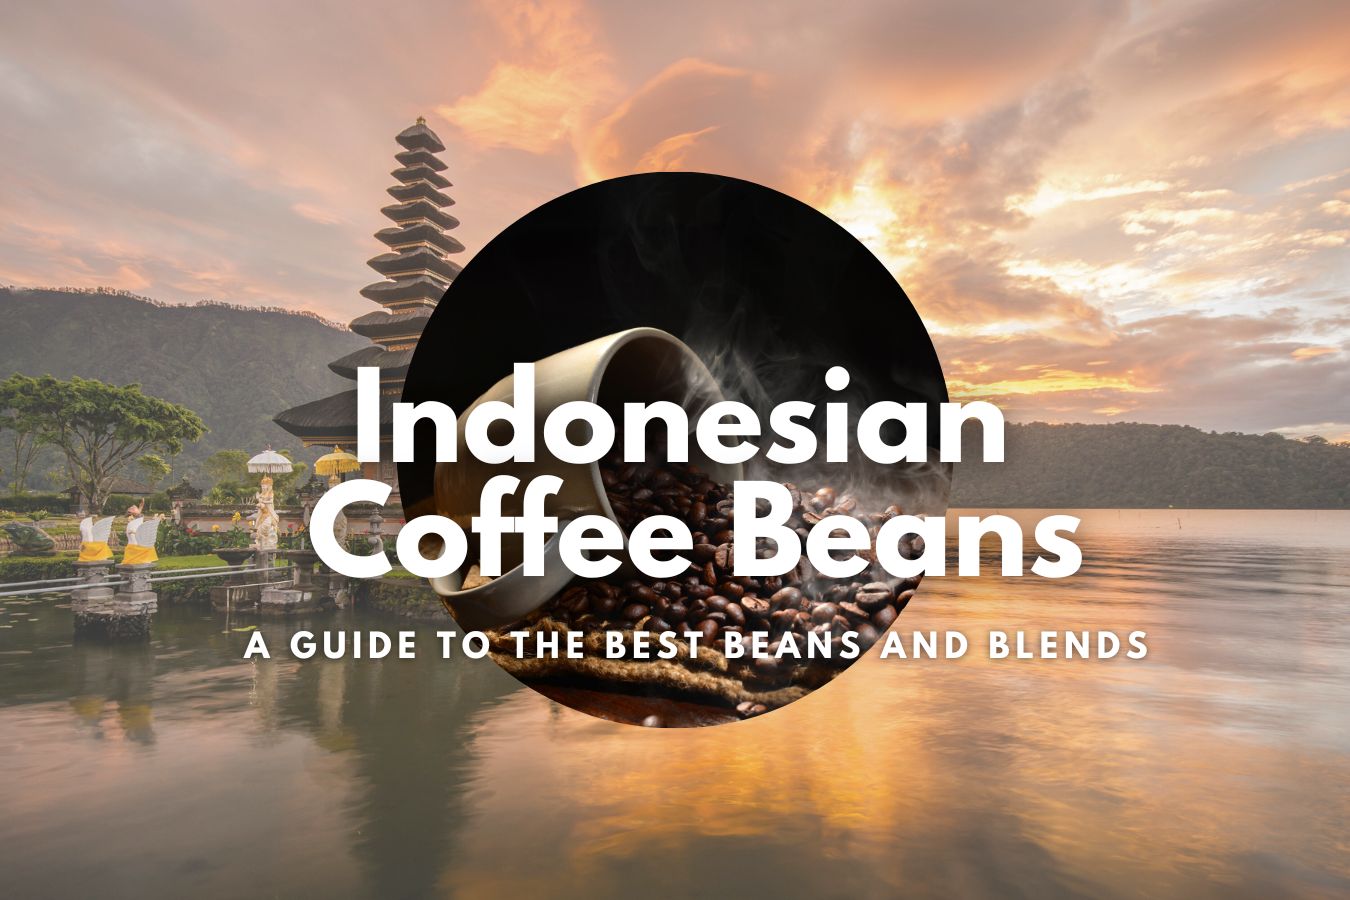 Indonesian Coffee Beans A Guide to the Best Beans and Blends